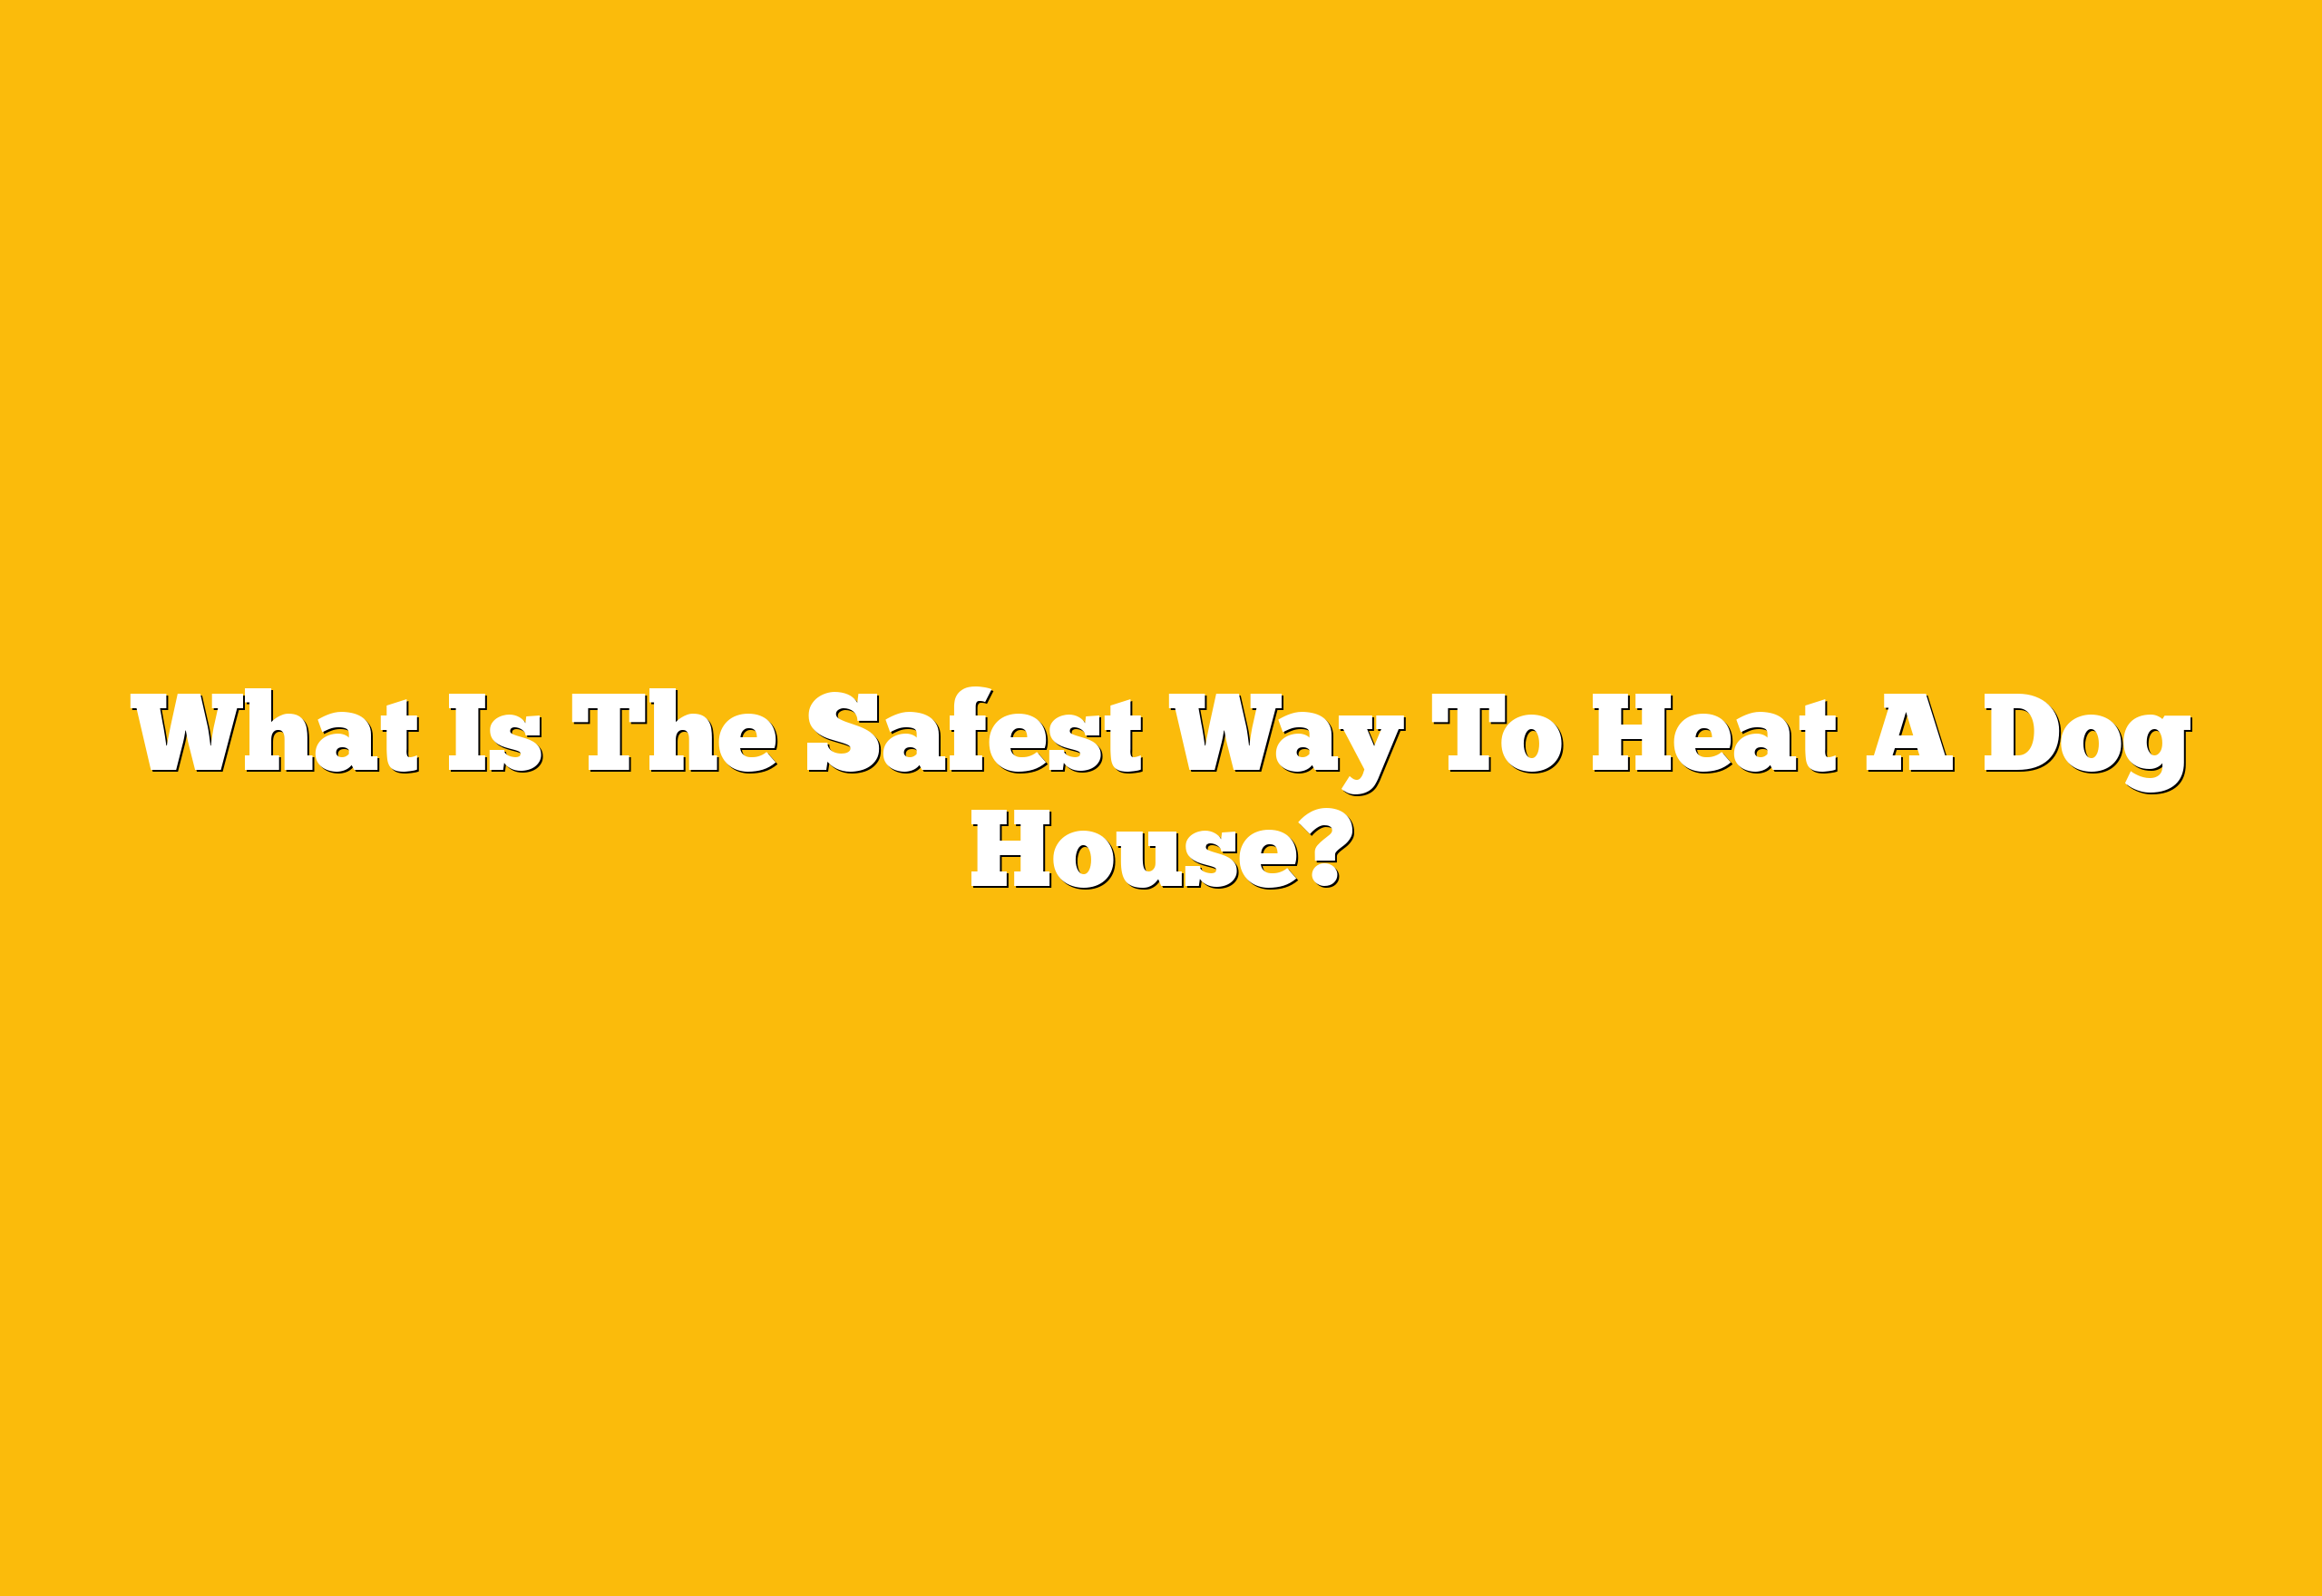 What Is The Safest Way To Heat A Dog House?